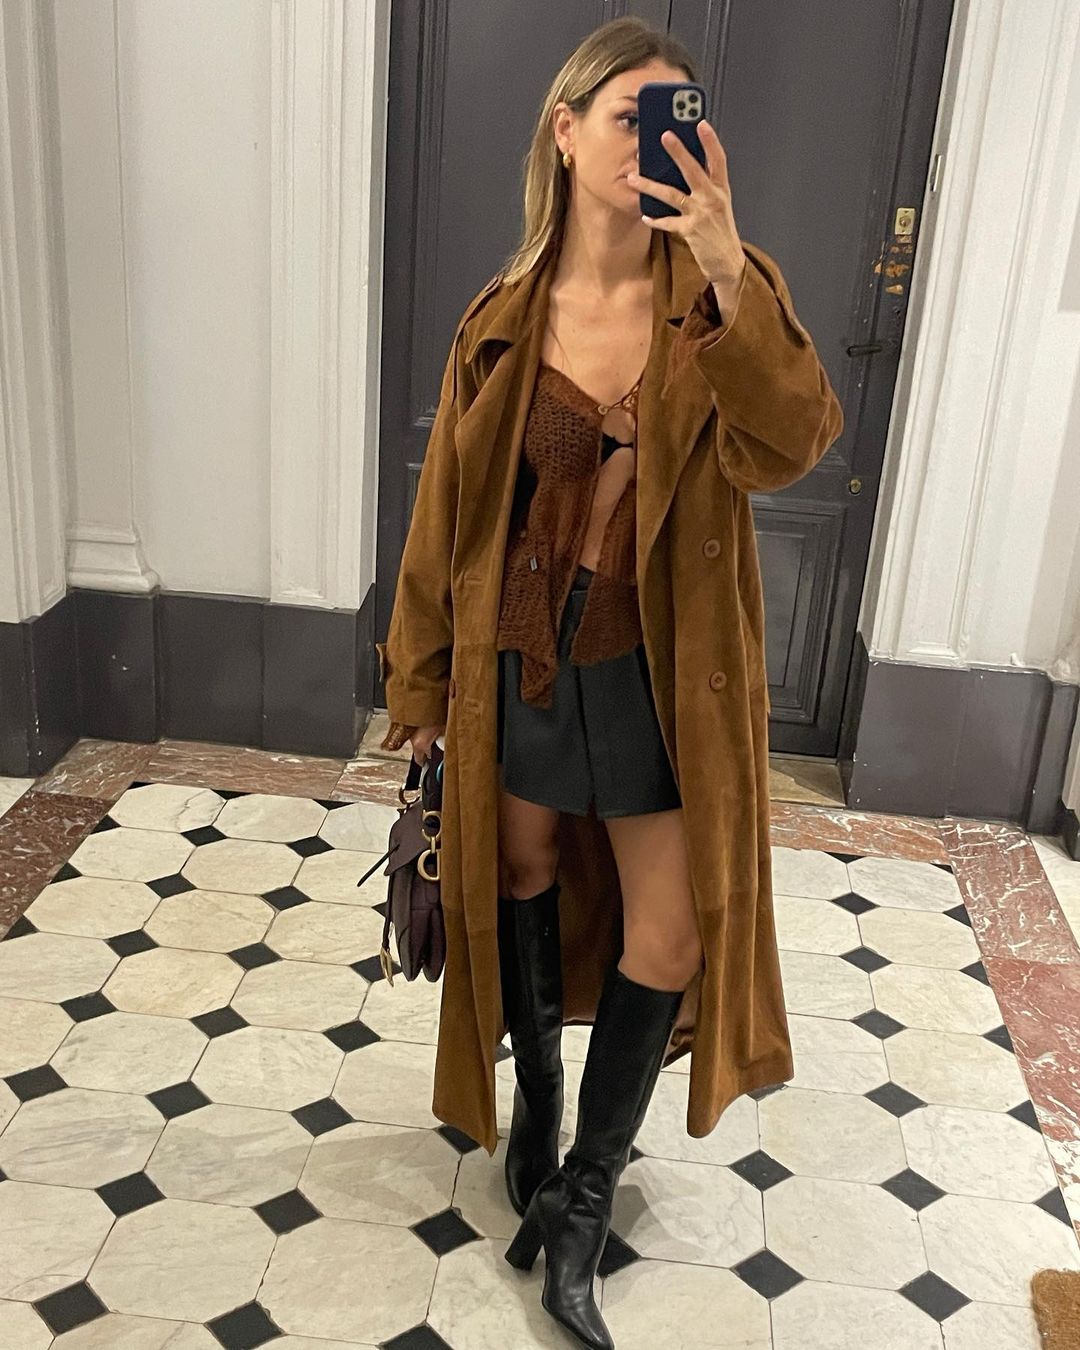 Outfits with Knee-High Boots: @annelauremais wearing trench coat and mini skirt